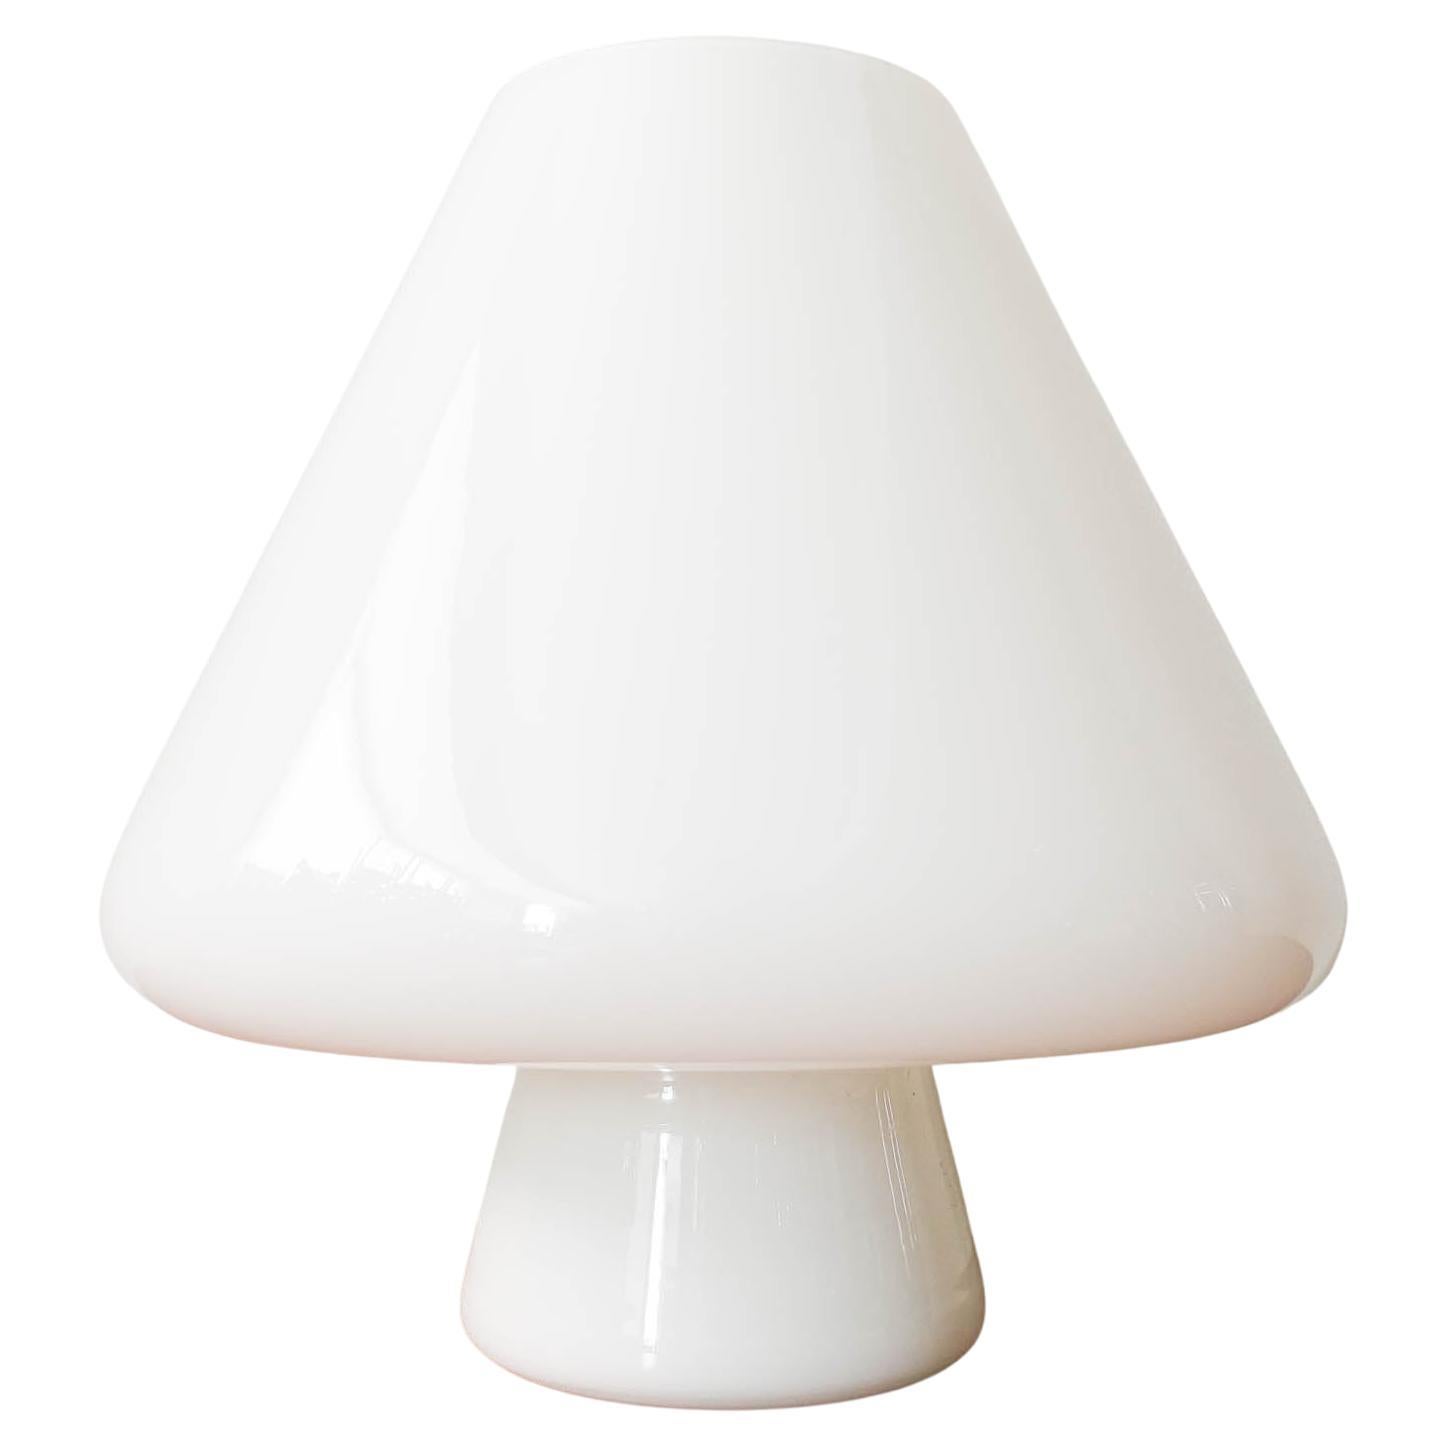 Opaline Glass Mushroom Table Lamp from Venini, 1960s For Sale at 1stDibs